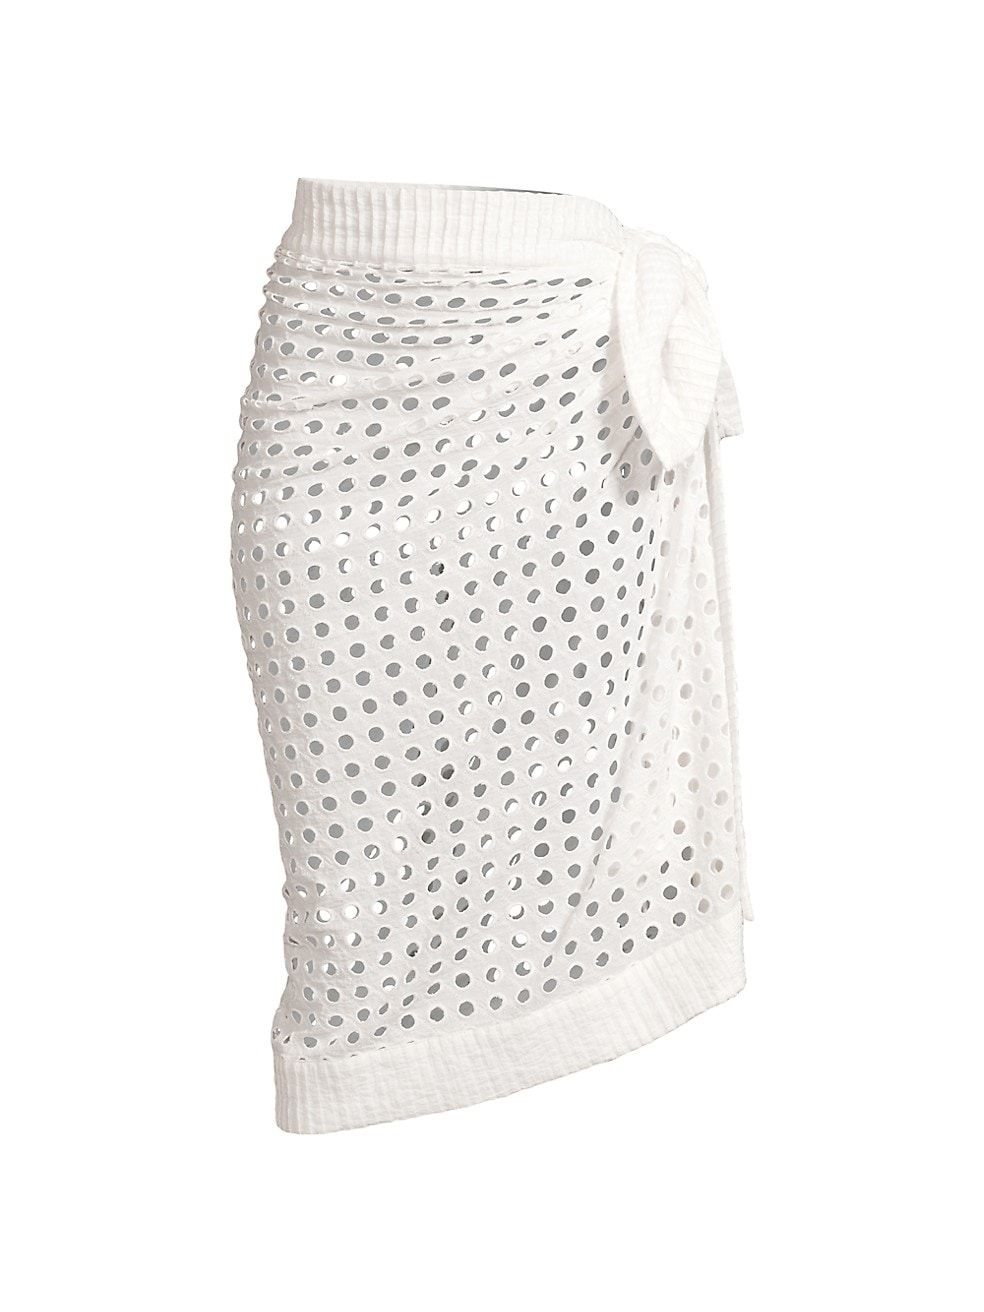 Solid & Striped Eyelet Cotton Pareo | Saks Fifth Avenue